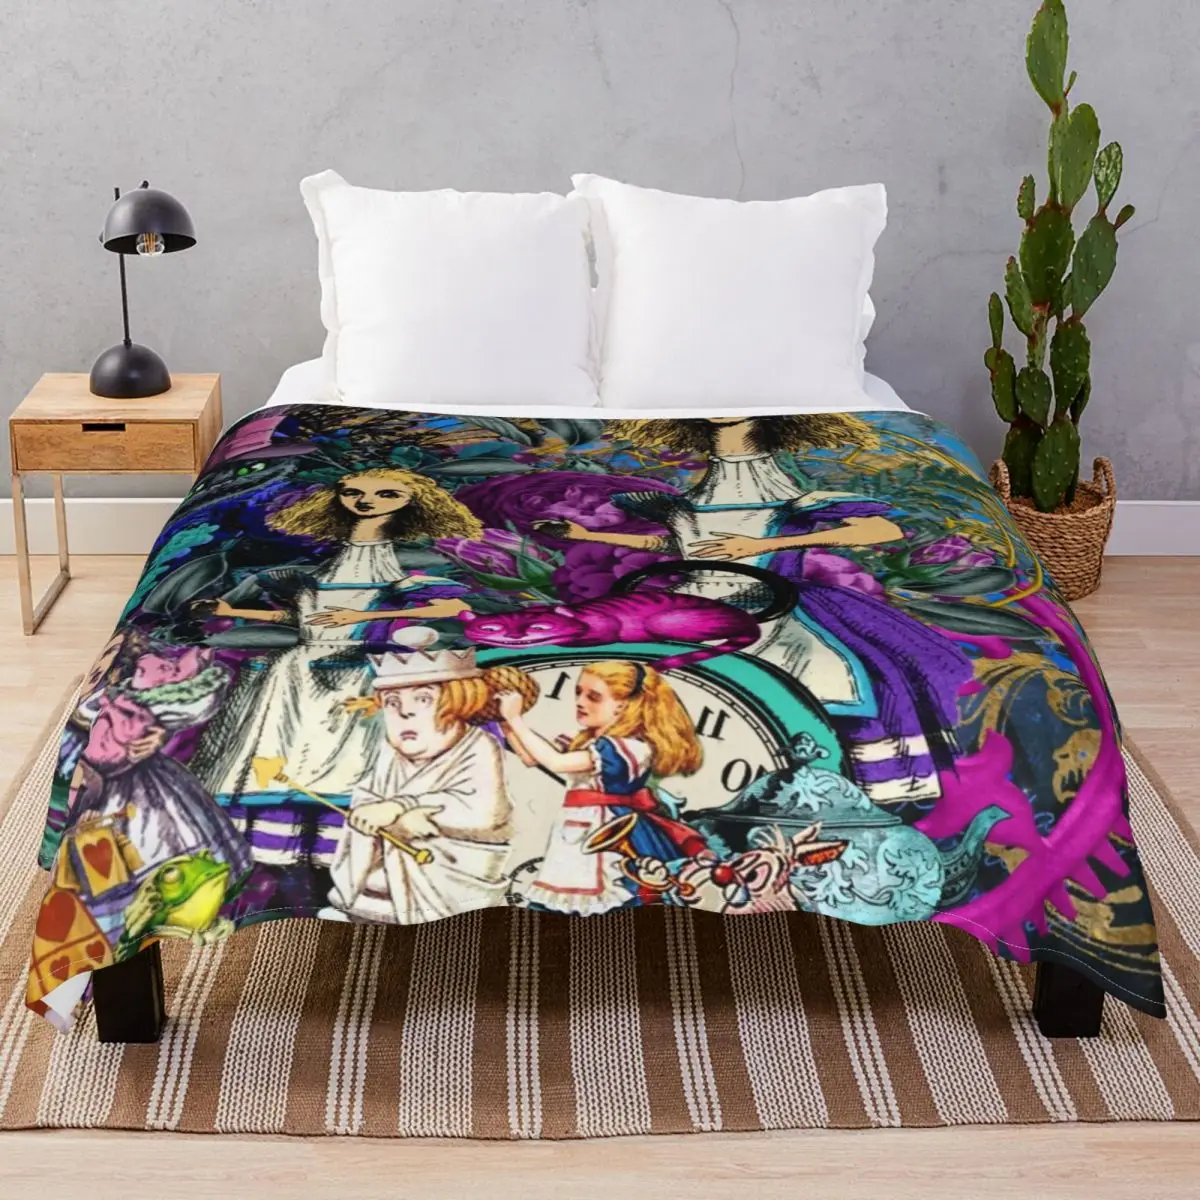 Alice In Wonderland Blankets Fleece Autumn Super Soft Throw Blanket for Bed Home Couch Travel Office